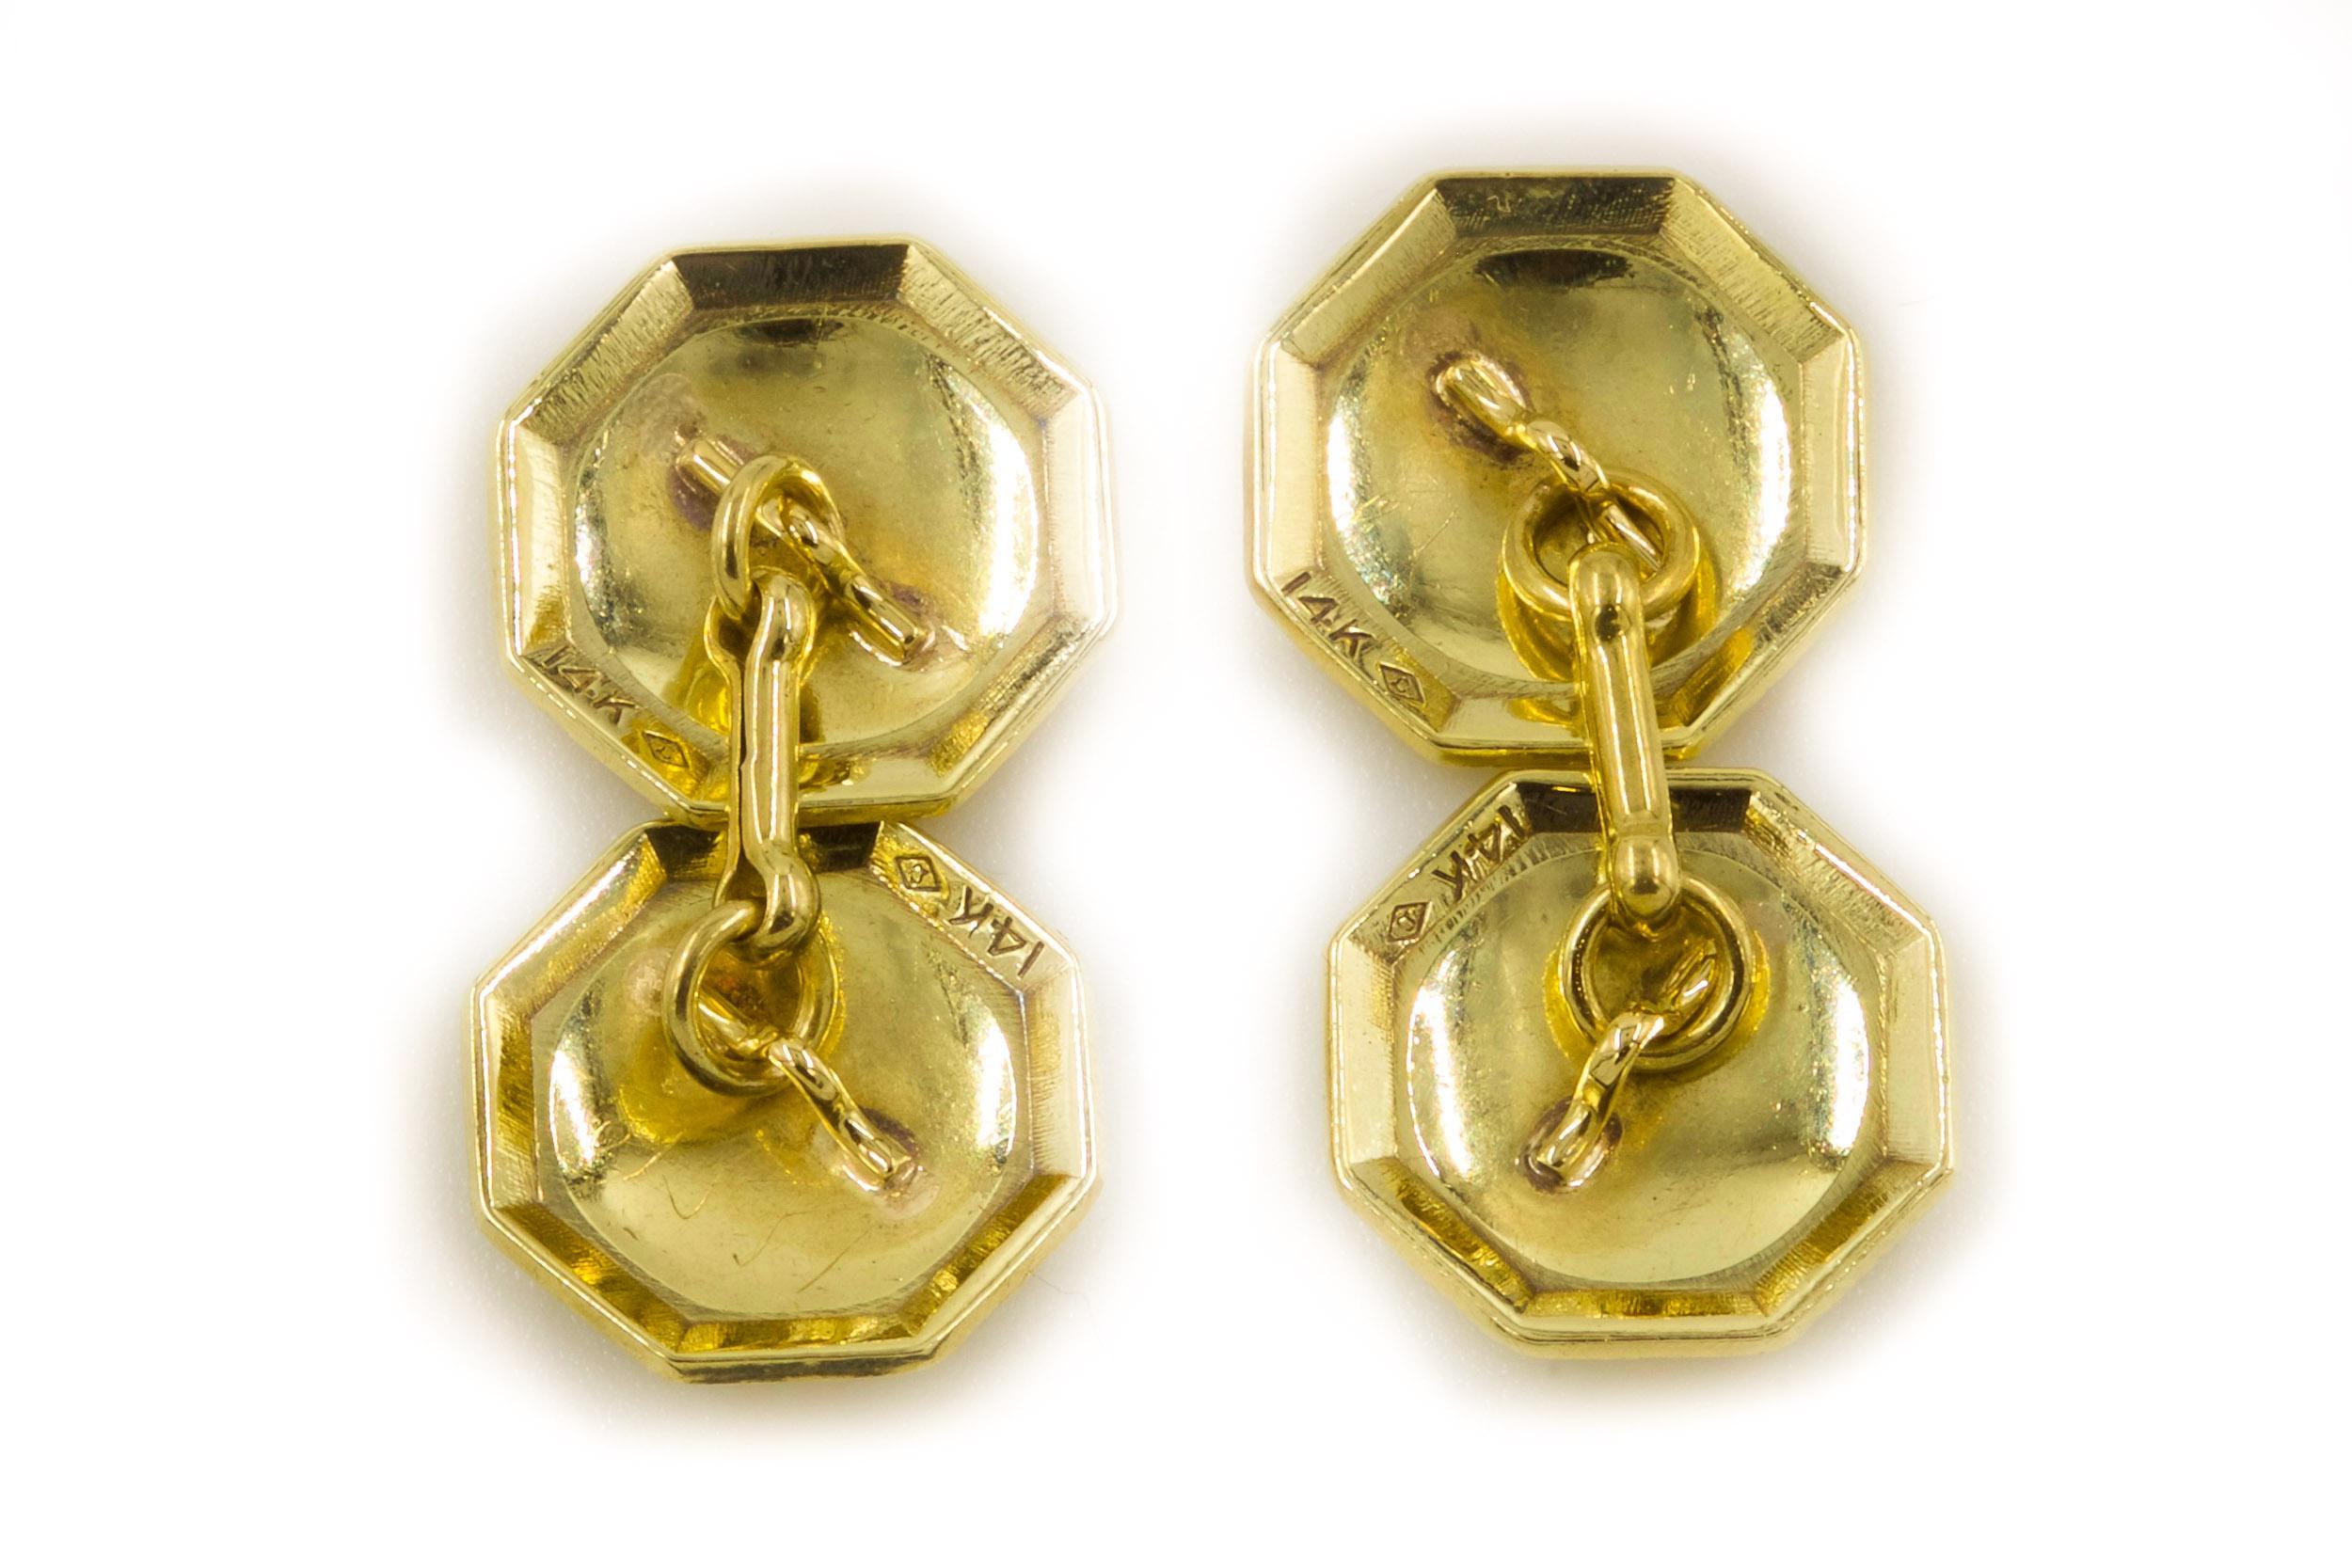 Art Deco Pair of 14K Yellow Gold Engraved Cuff-Links by Lebolt & Co., circa 1925 In Good Condition For Sale In Shippensburg, PA